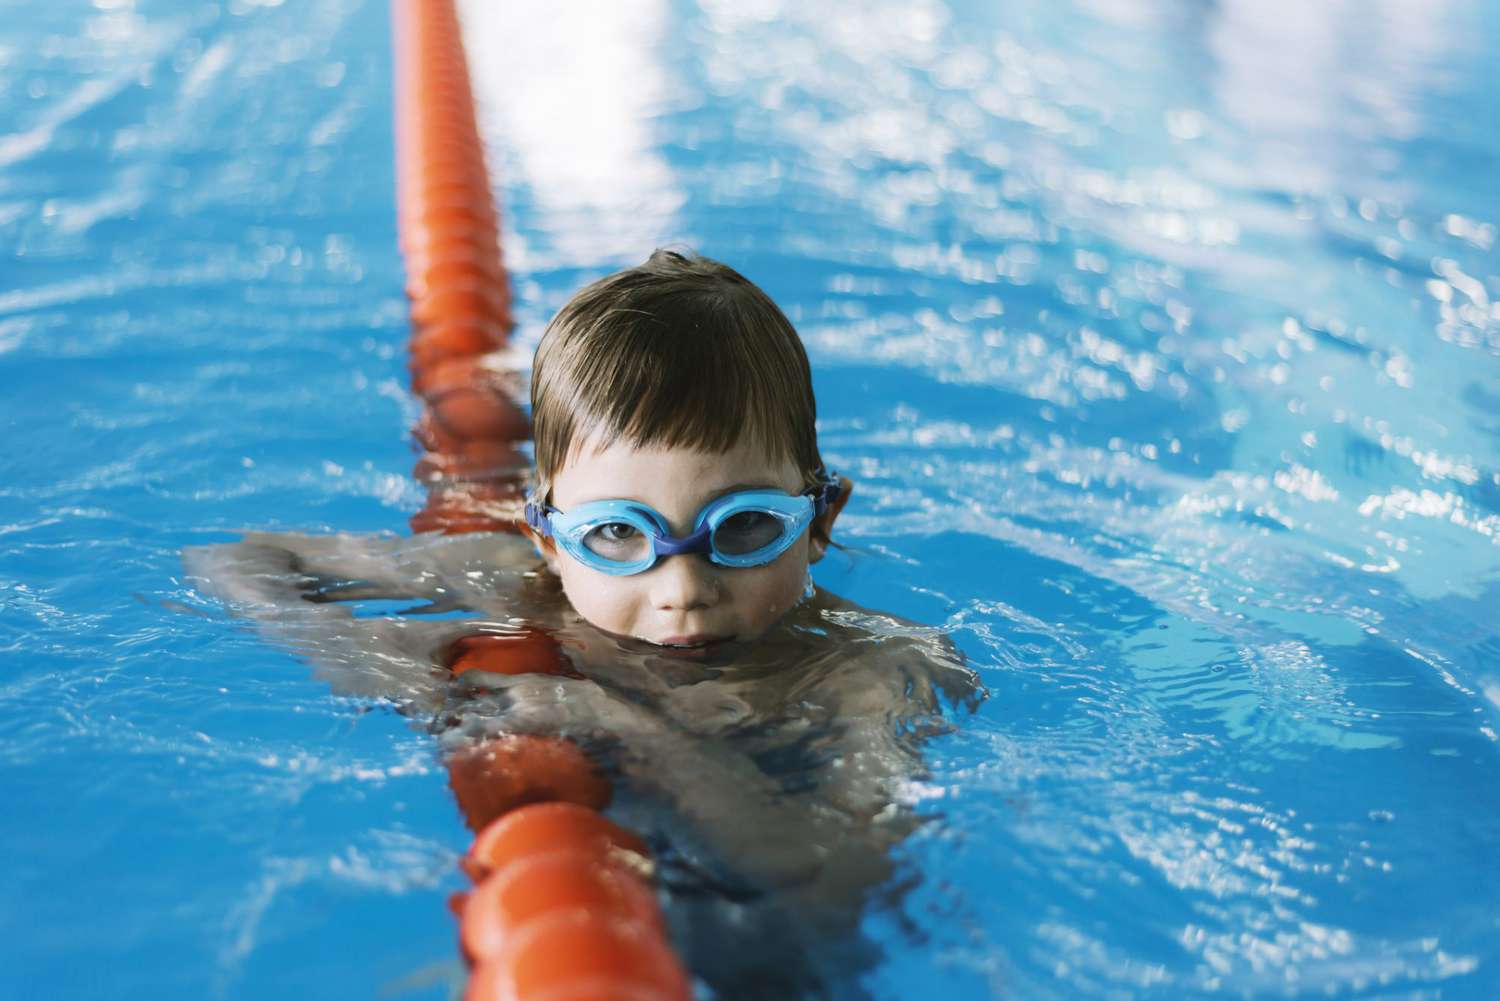 An image of boy during swimming lessons.